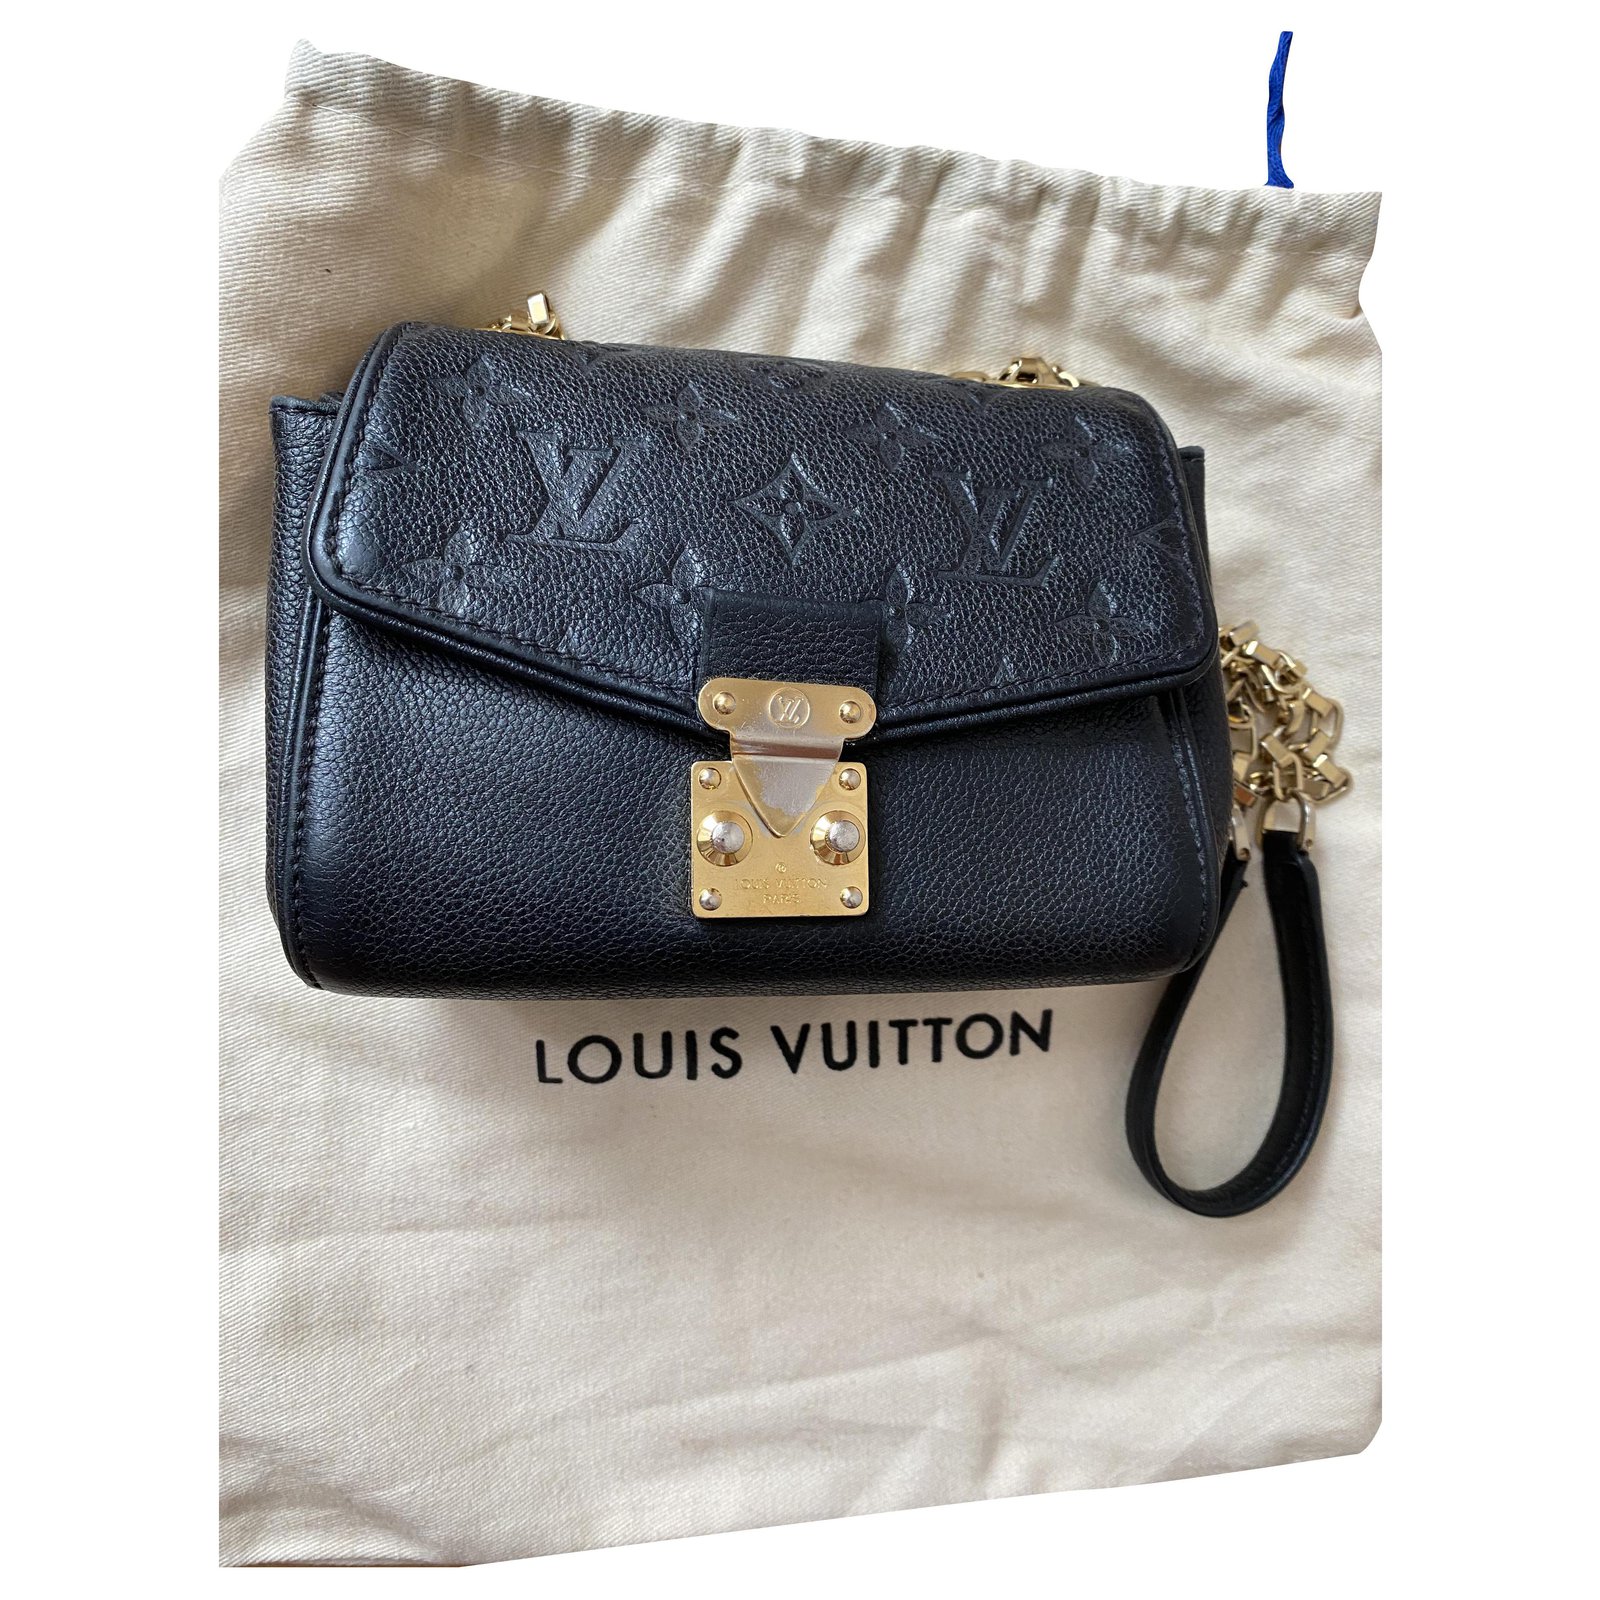 Louis Vuitton Saint-Germain BB Bag Reference Guide - Spotted Fashion